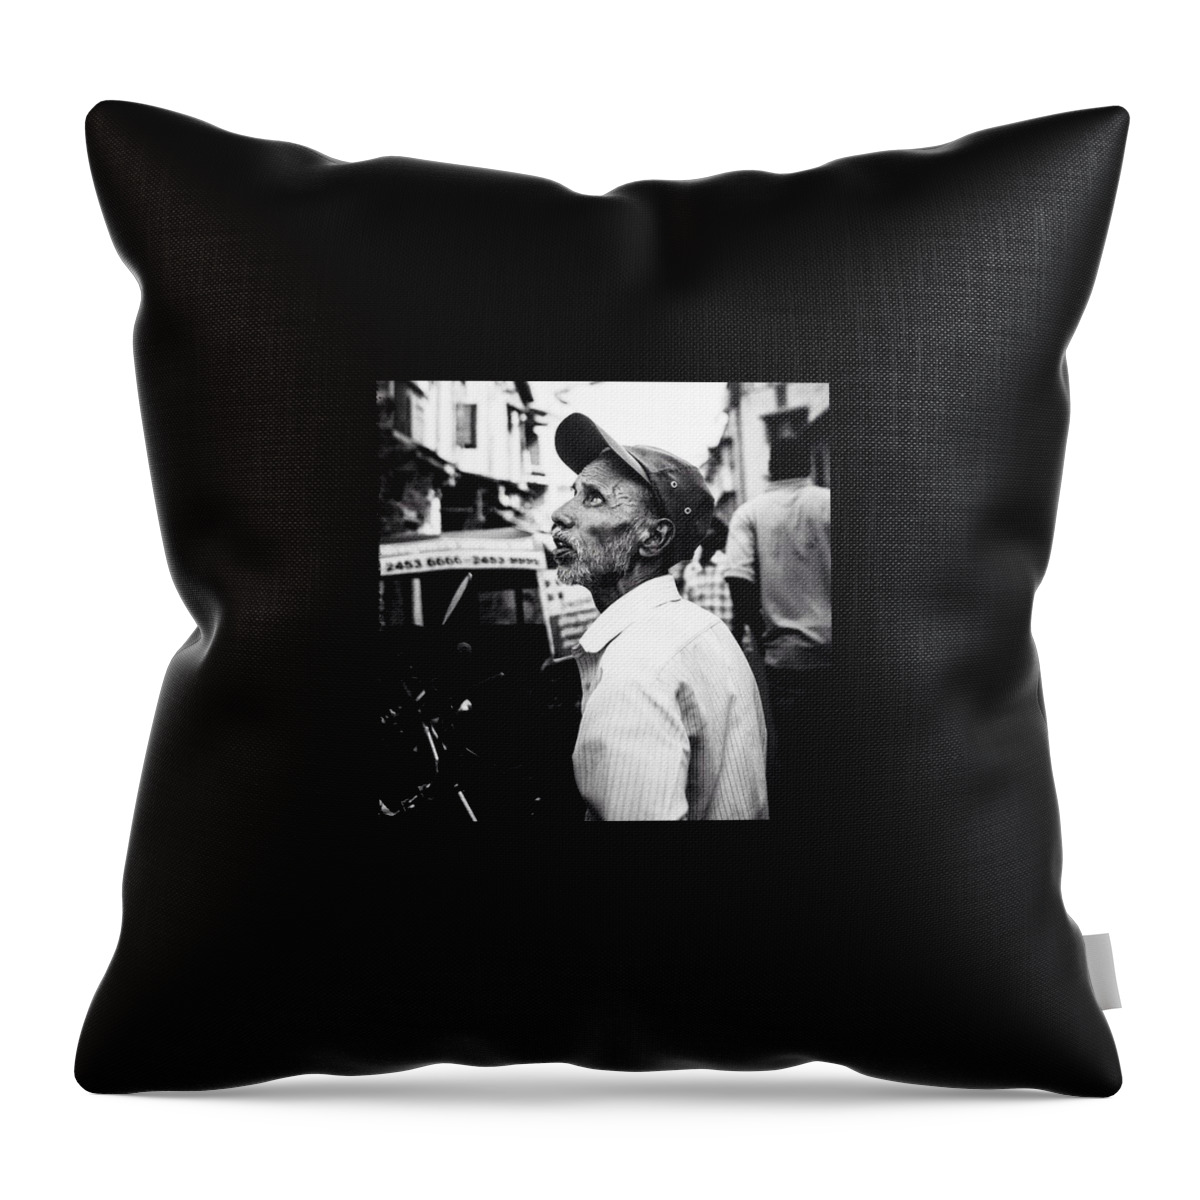 Pune Throw Pillow featuring the photograph Wizened by Aleck Cartwright